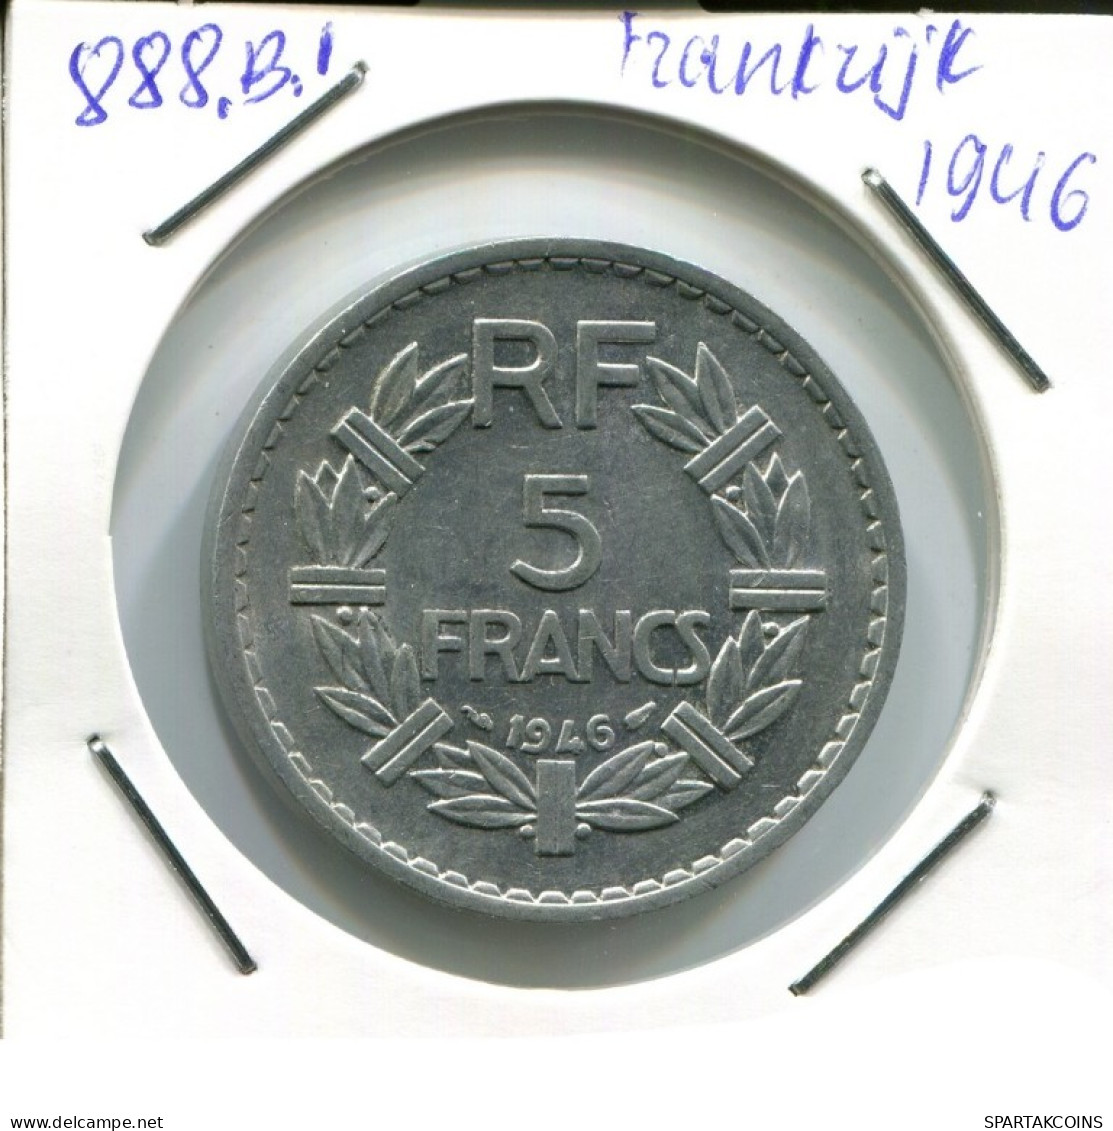 5 FRANCS 1946 FRANCE French Coin #AN385.U.A - 5 Francs